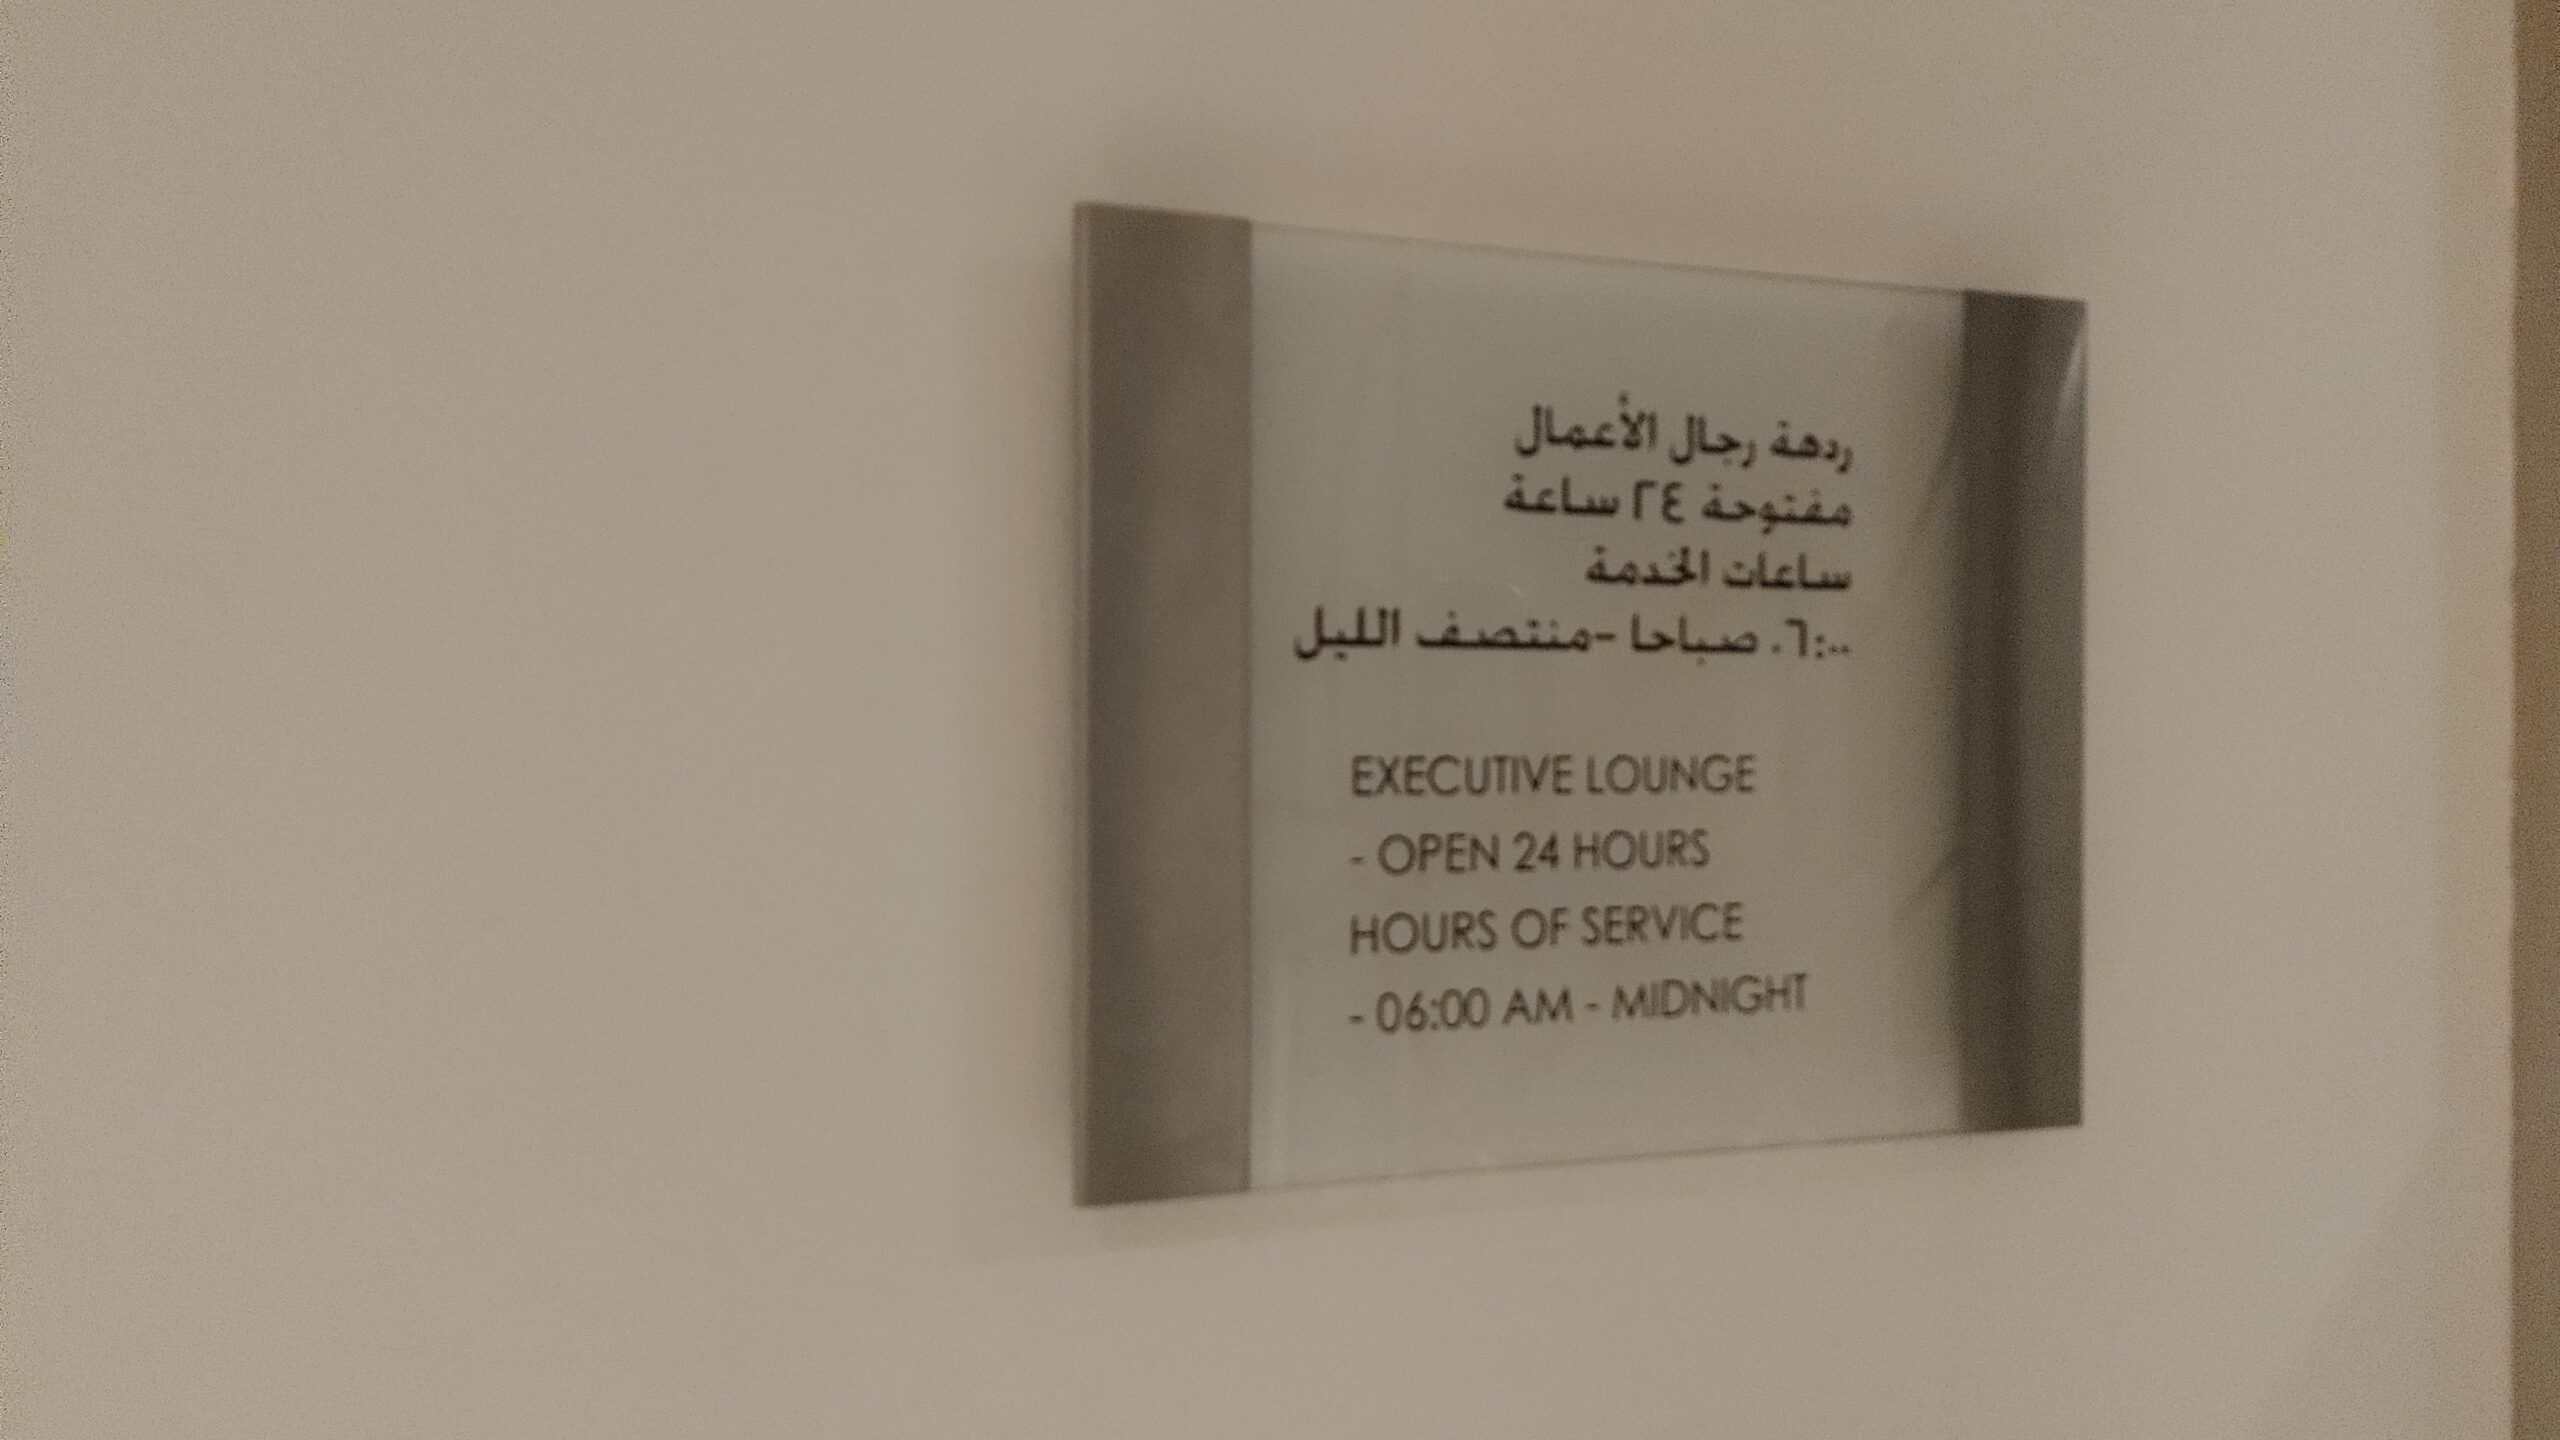 PICTURE OF THE SIGN AT THE ENTRANCE OF THE EXECUTIVE LOUNGE.